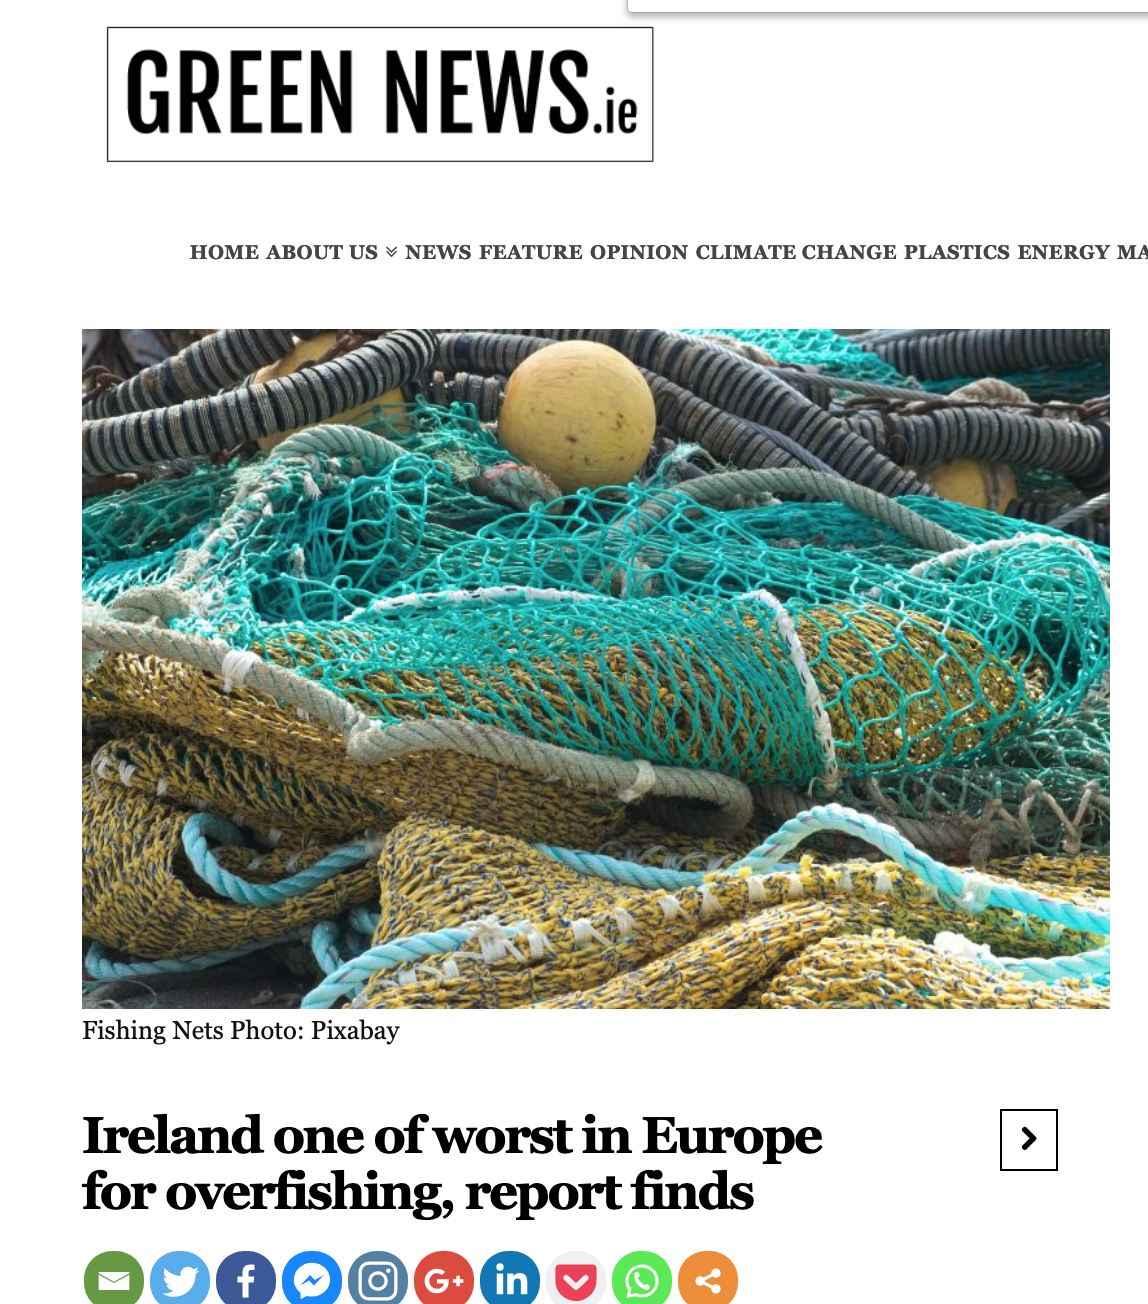 Ireland one of worst in Europe for overfishing, report finds